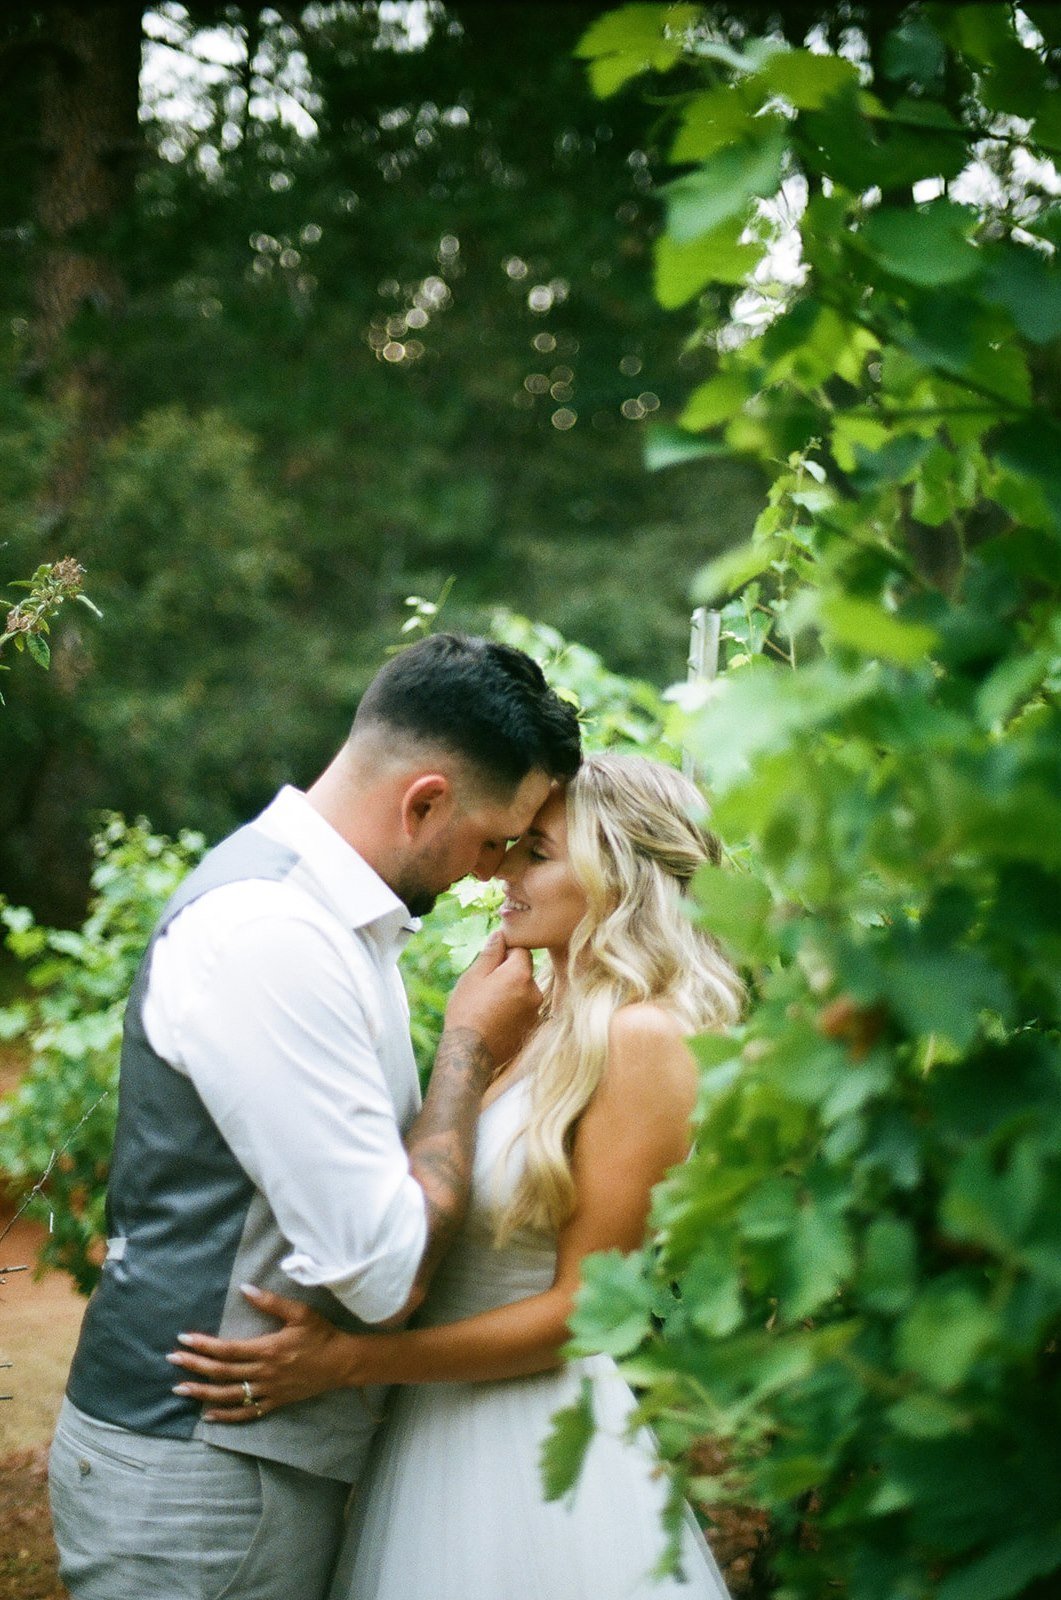 A beautiful intimate outdoor wedding day in Foresthill California with rustic and summer decor on film